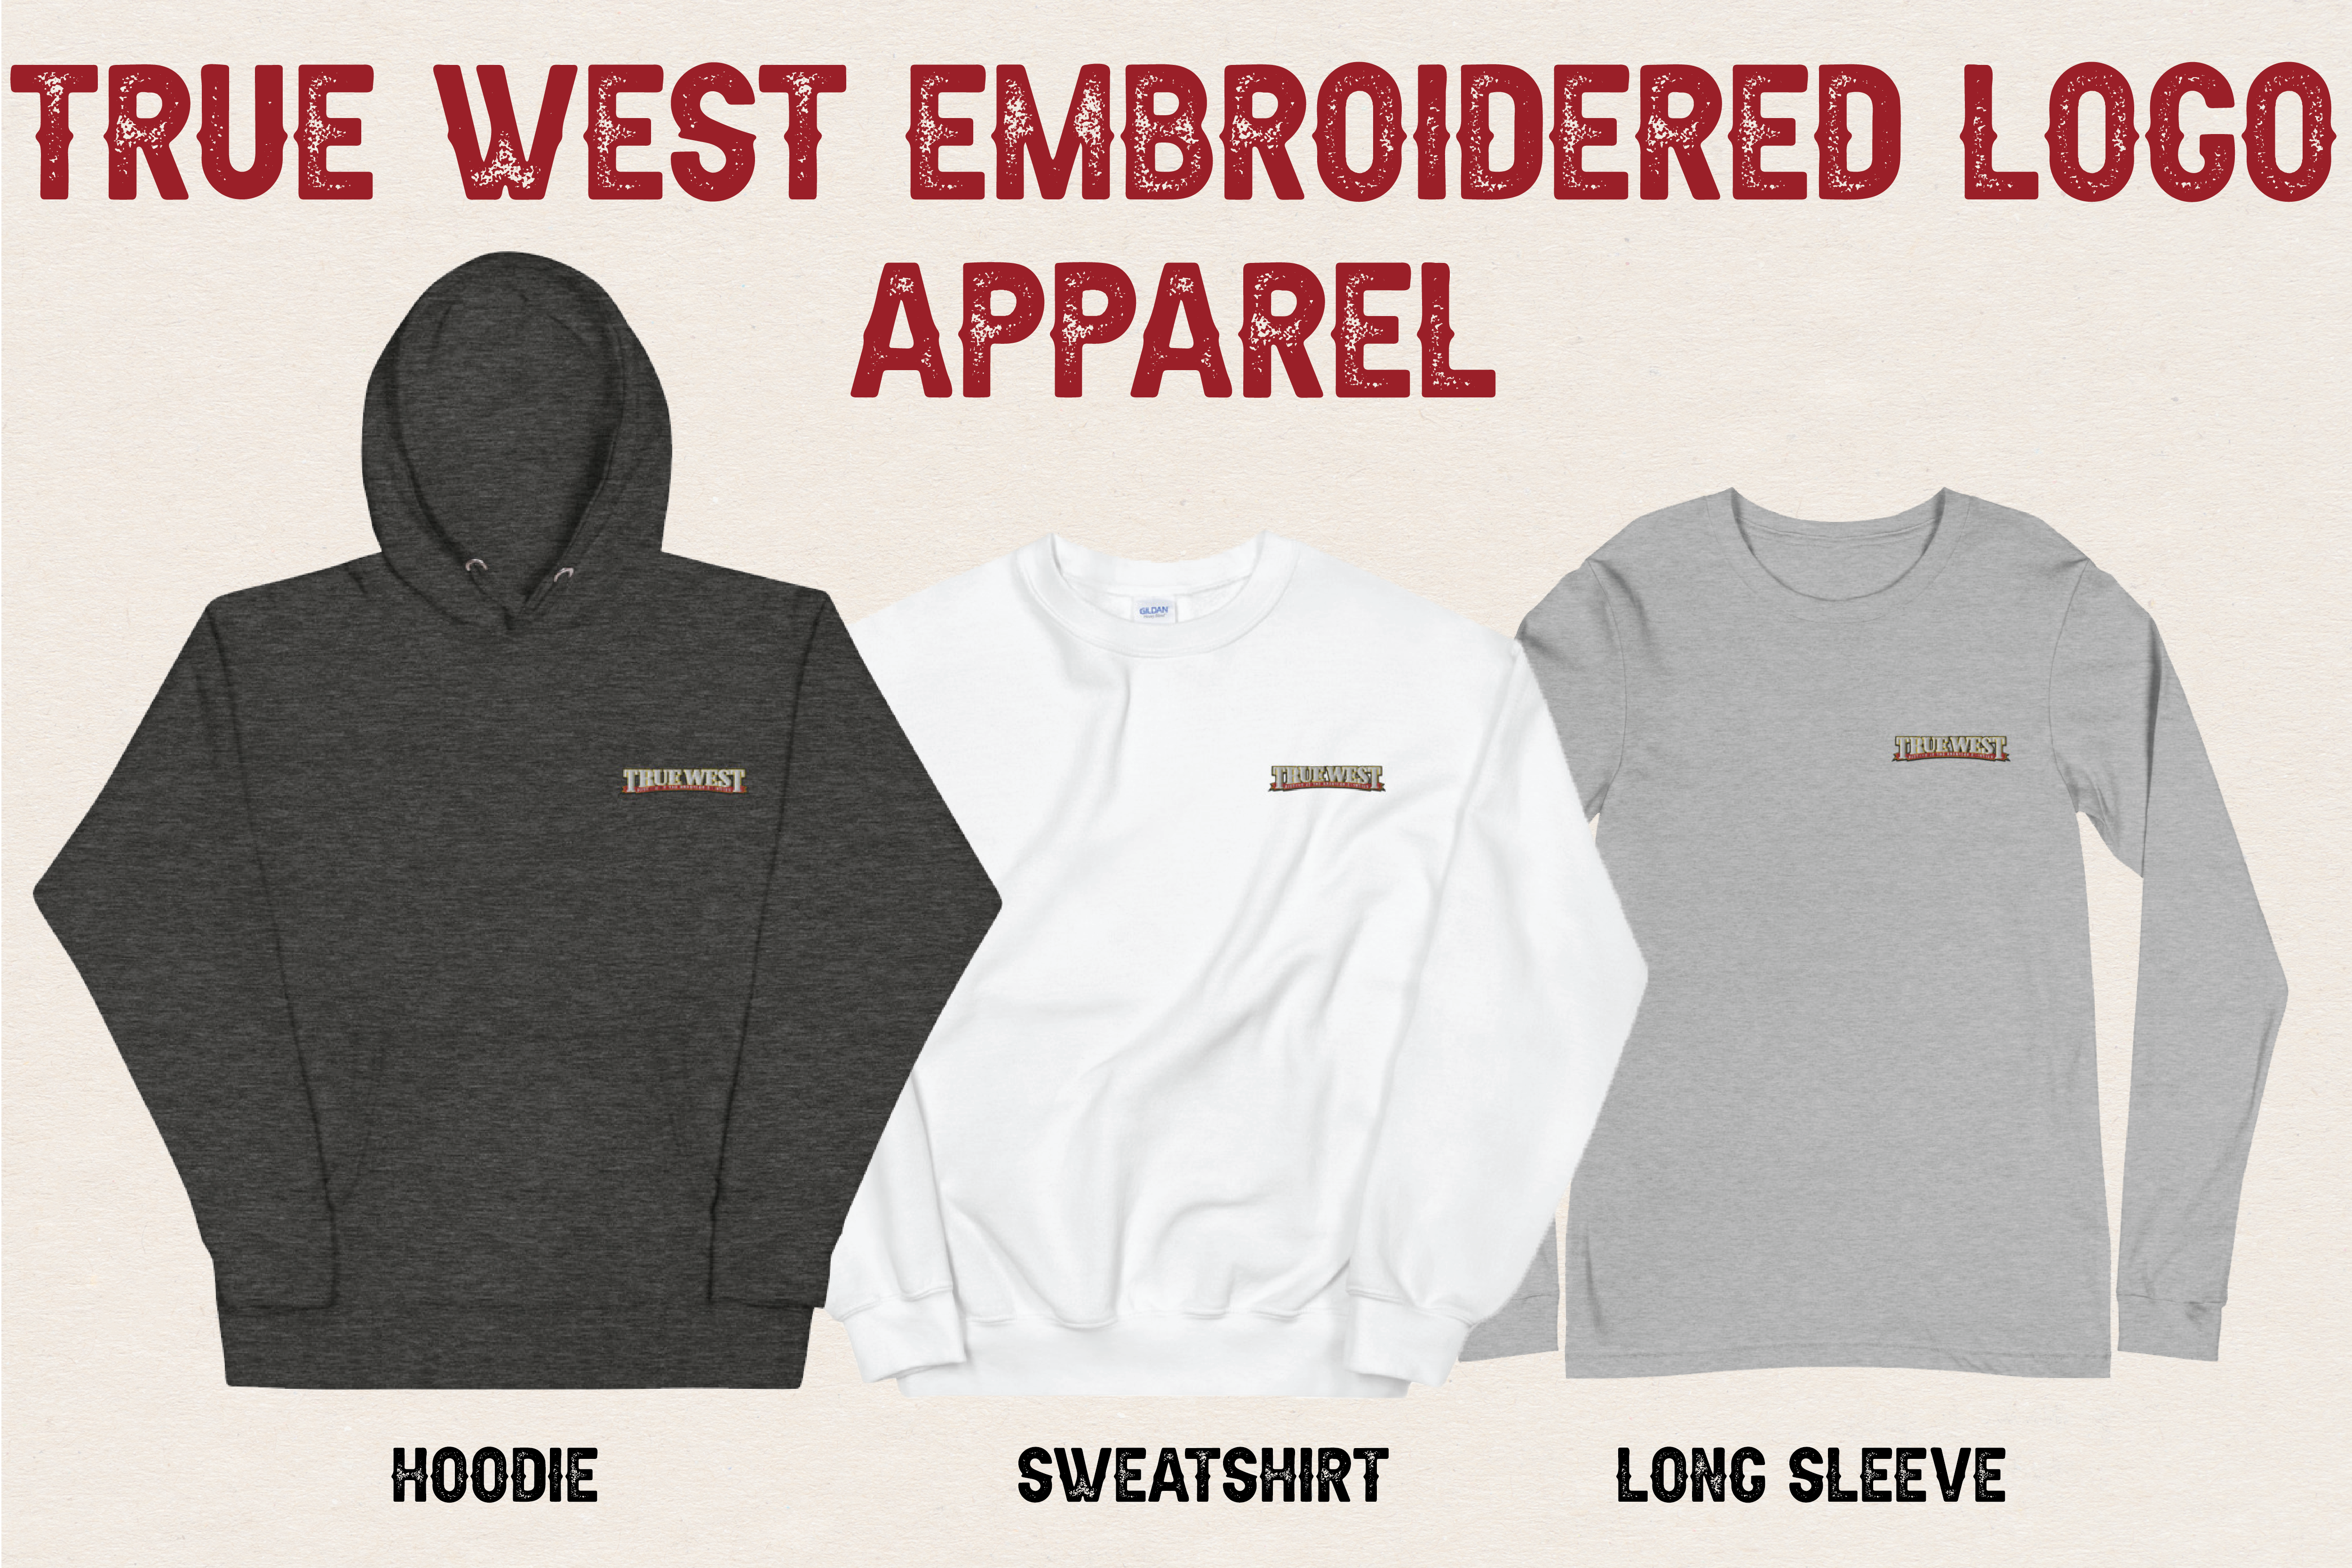 True West Embroidered Logo Apparel